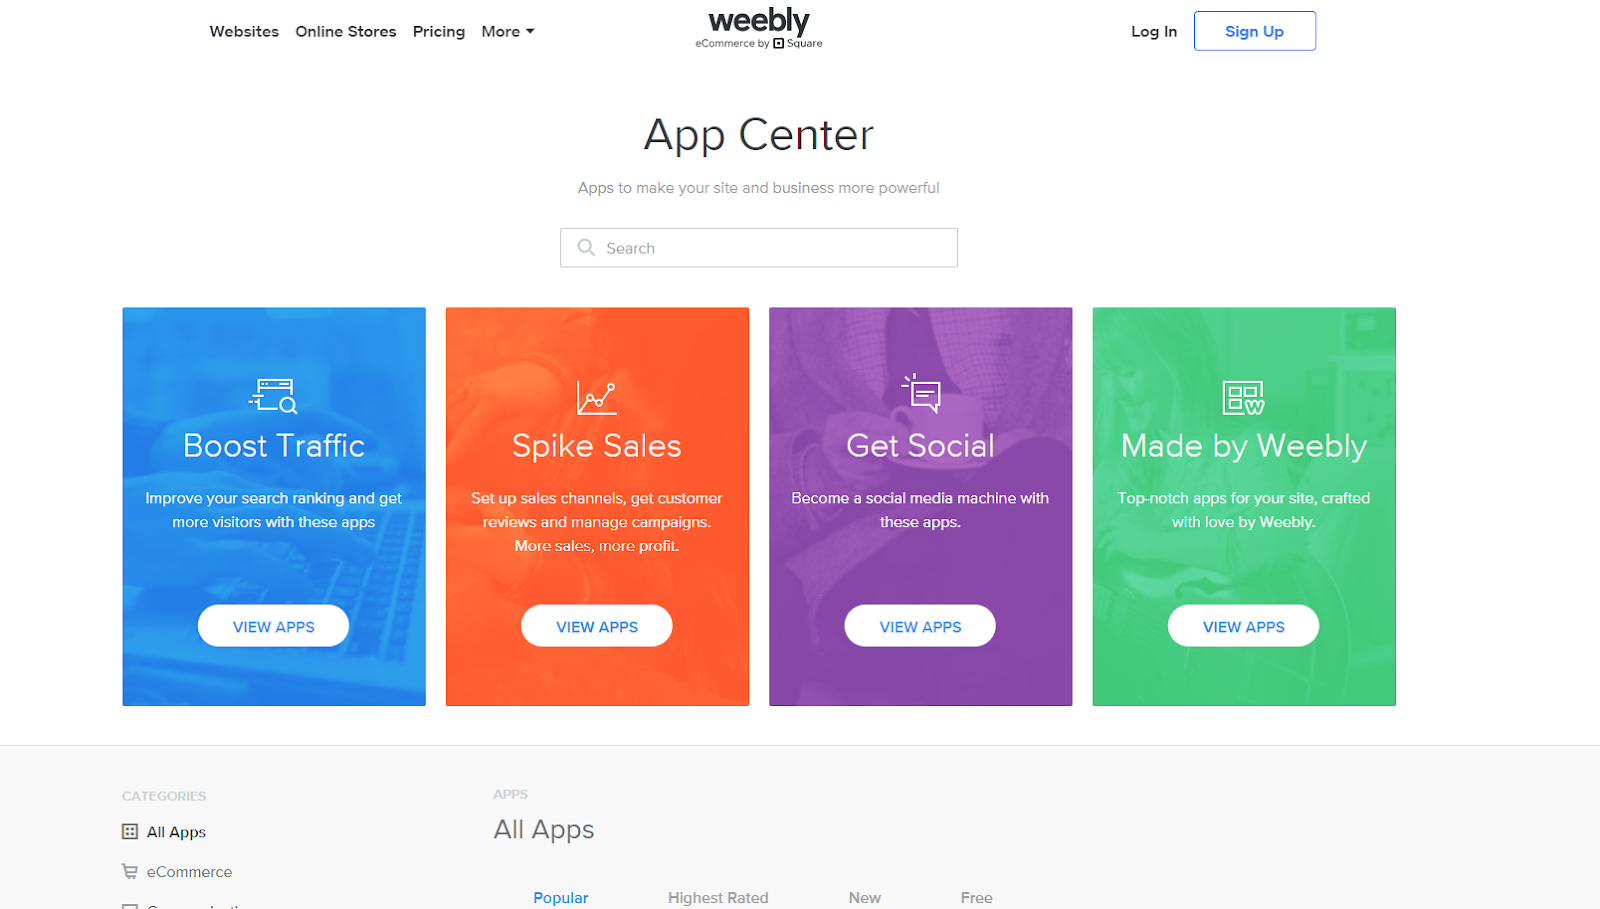 Weebly app center